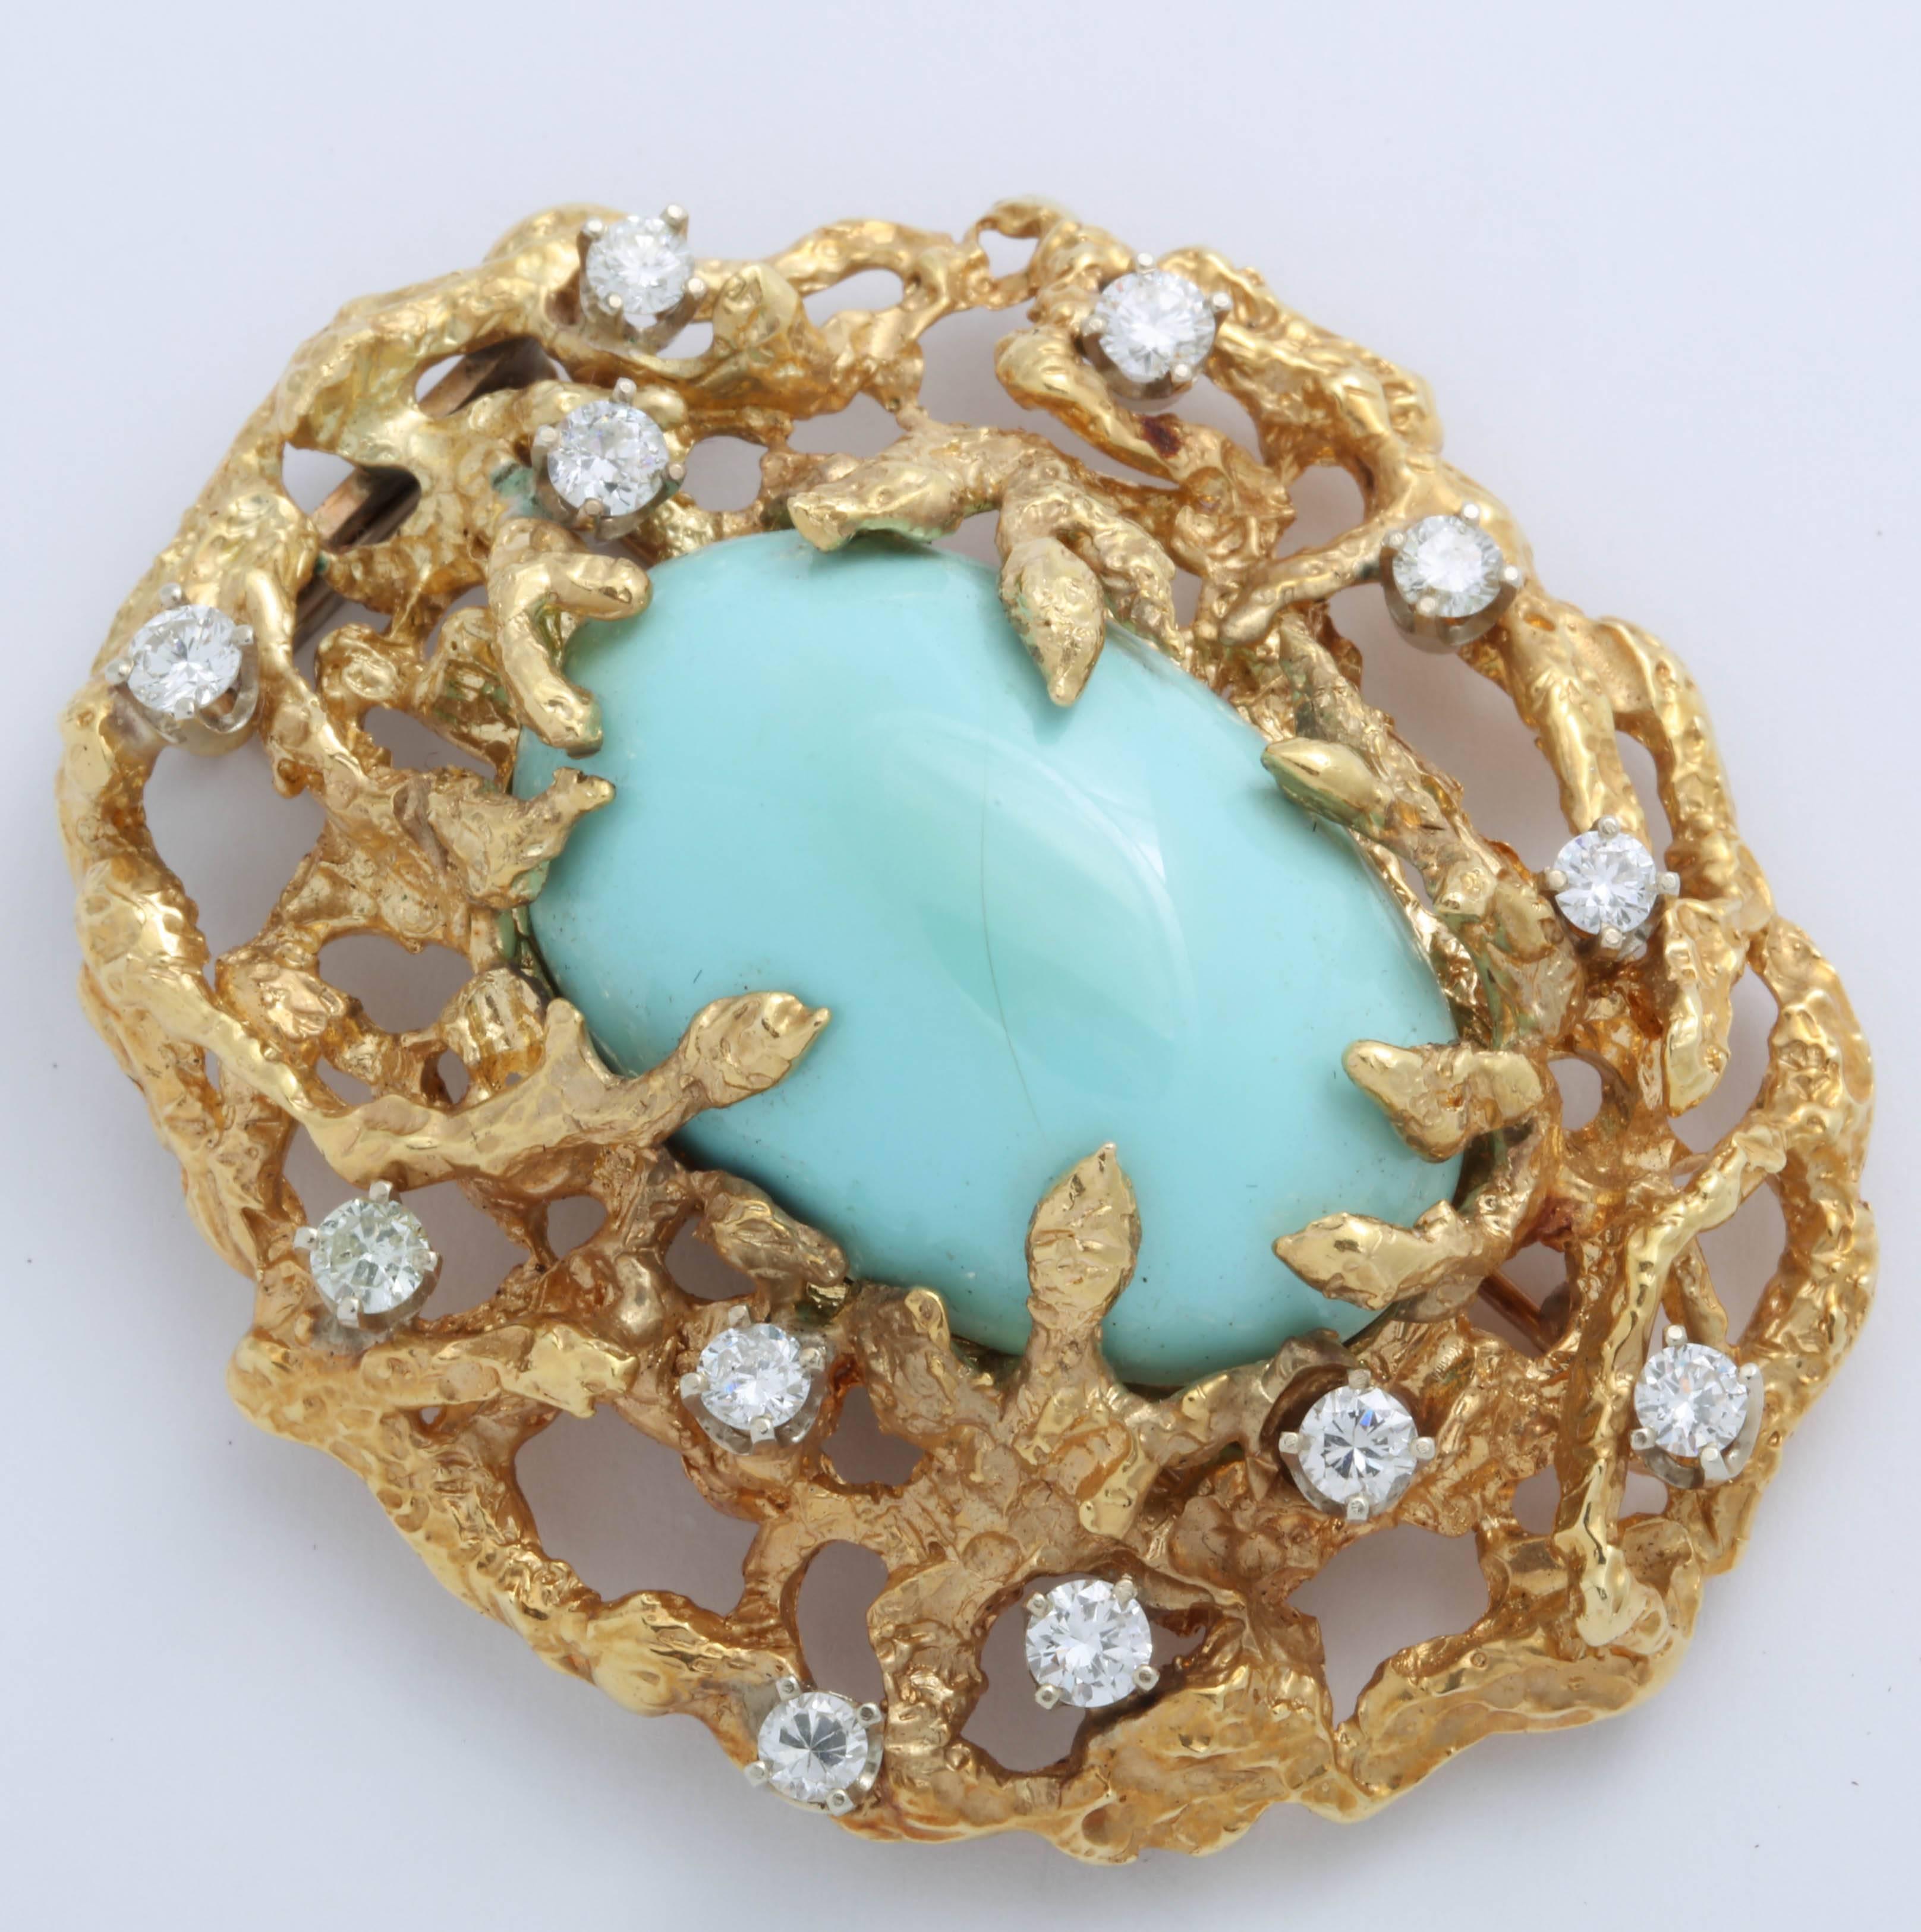 Oval Robin's Egg Blue Turquoise Brooch in Pierced 18kt Yellow double pronged Clip.  Set with 12 Prong set full cut Diamonds in white Gold.   Diamond weight -approximately - 2 carats.  Very luscious and oversized and poetic -  A veritable Gilded